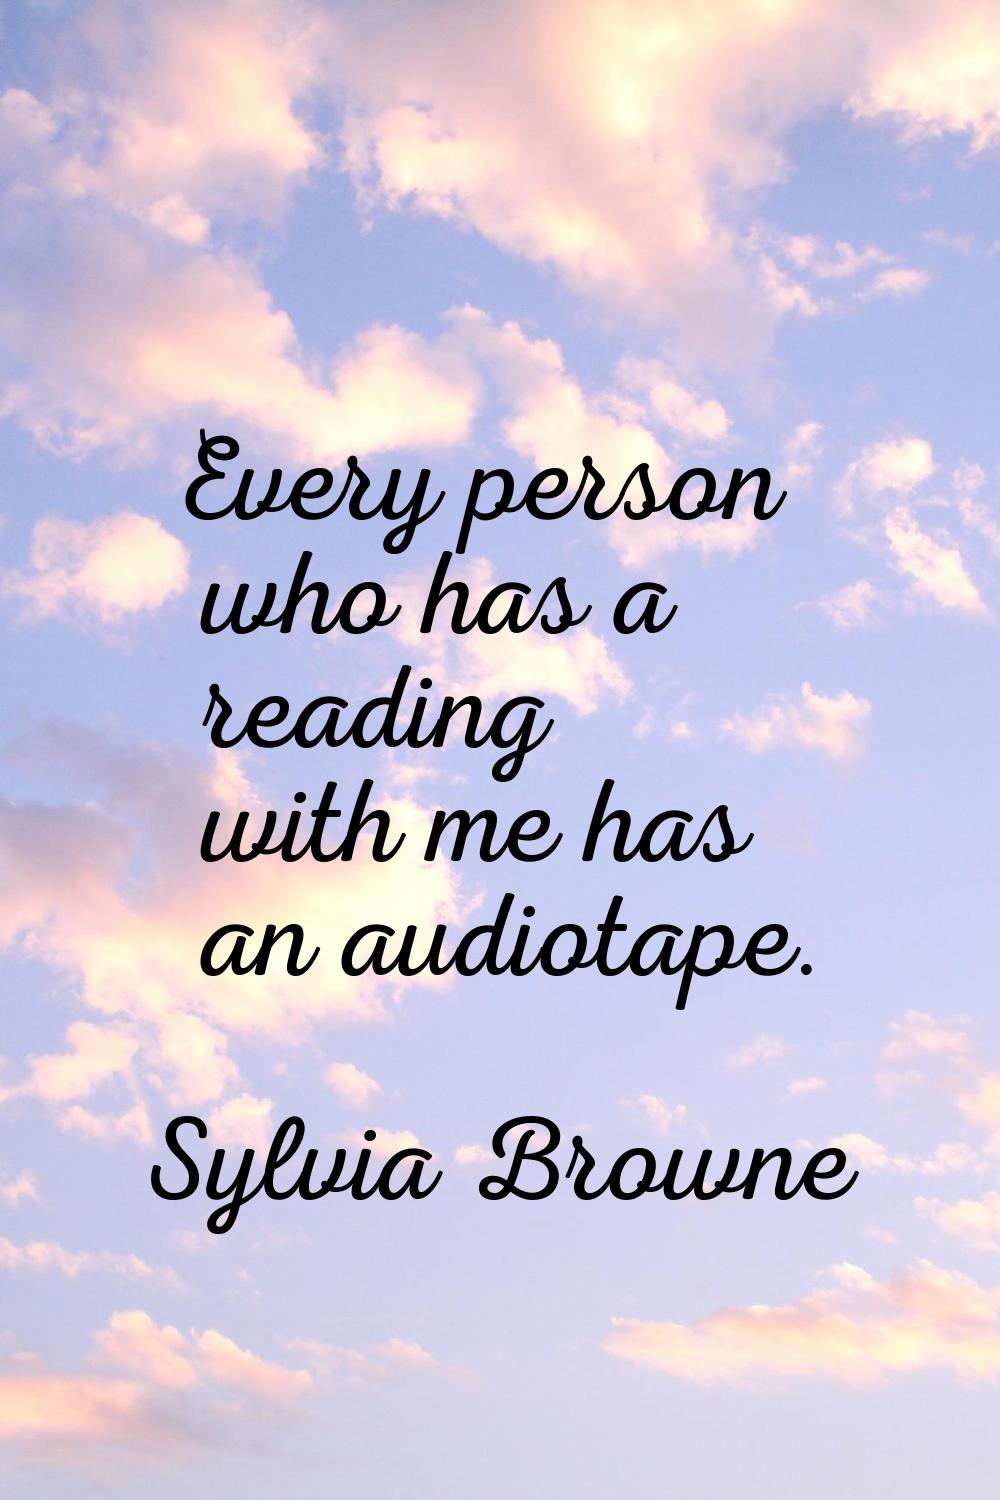 Every person who has a reading with me has an audiotape.